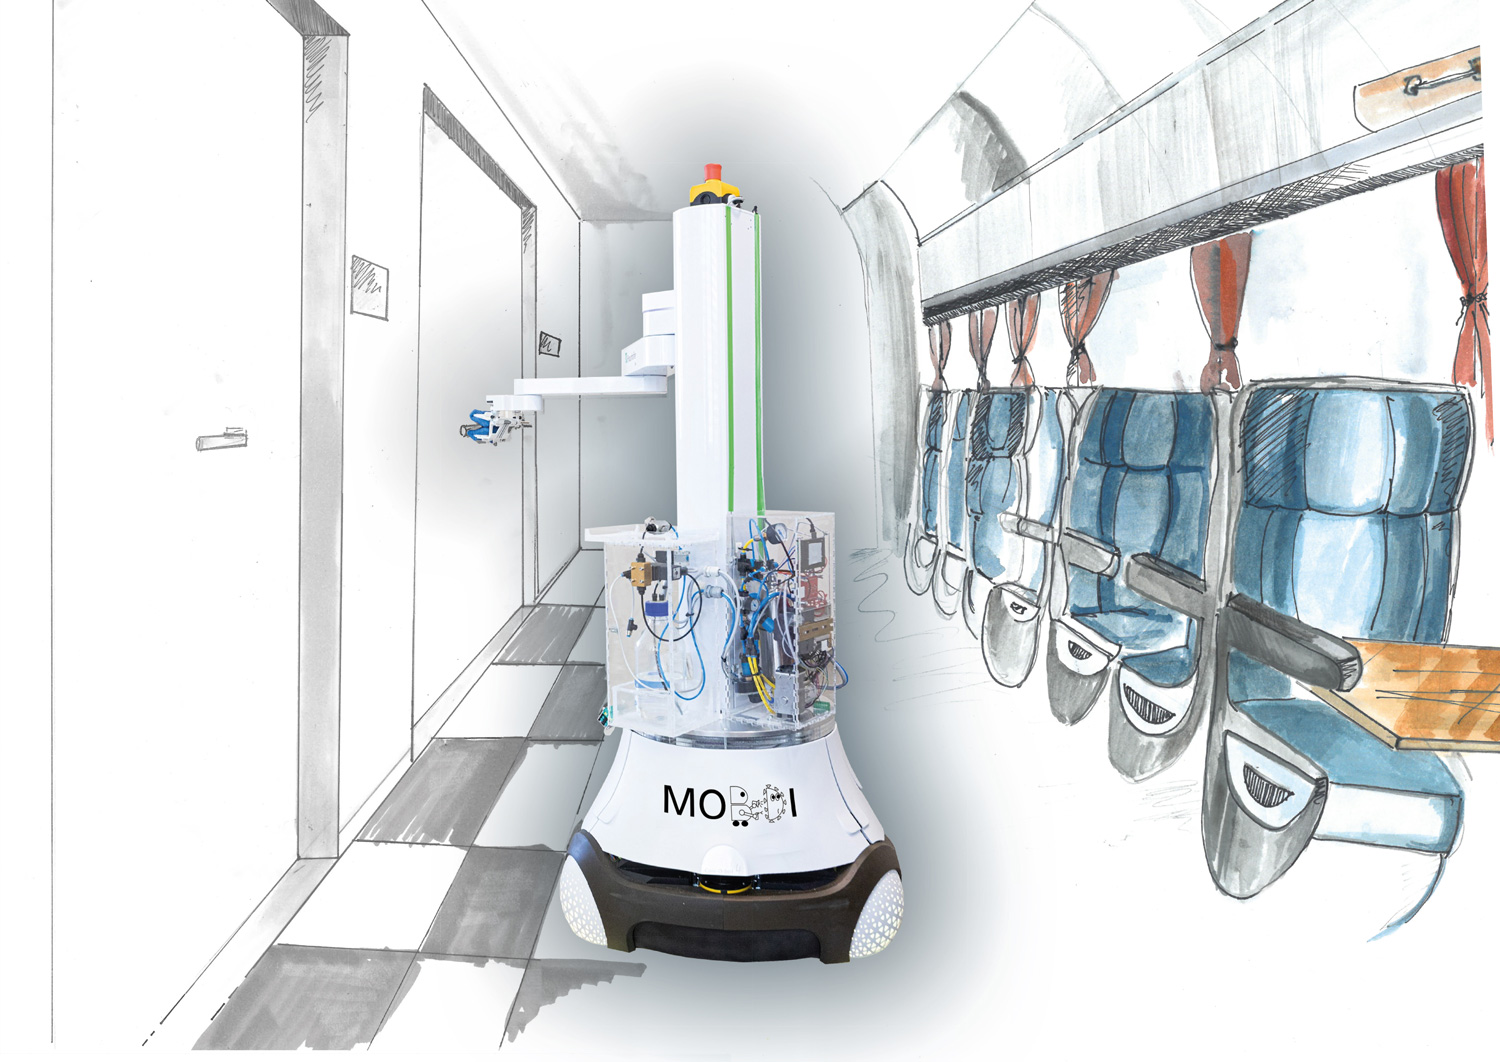 Illustration of the MobDi disinfection robot for use in a building and means of transport.